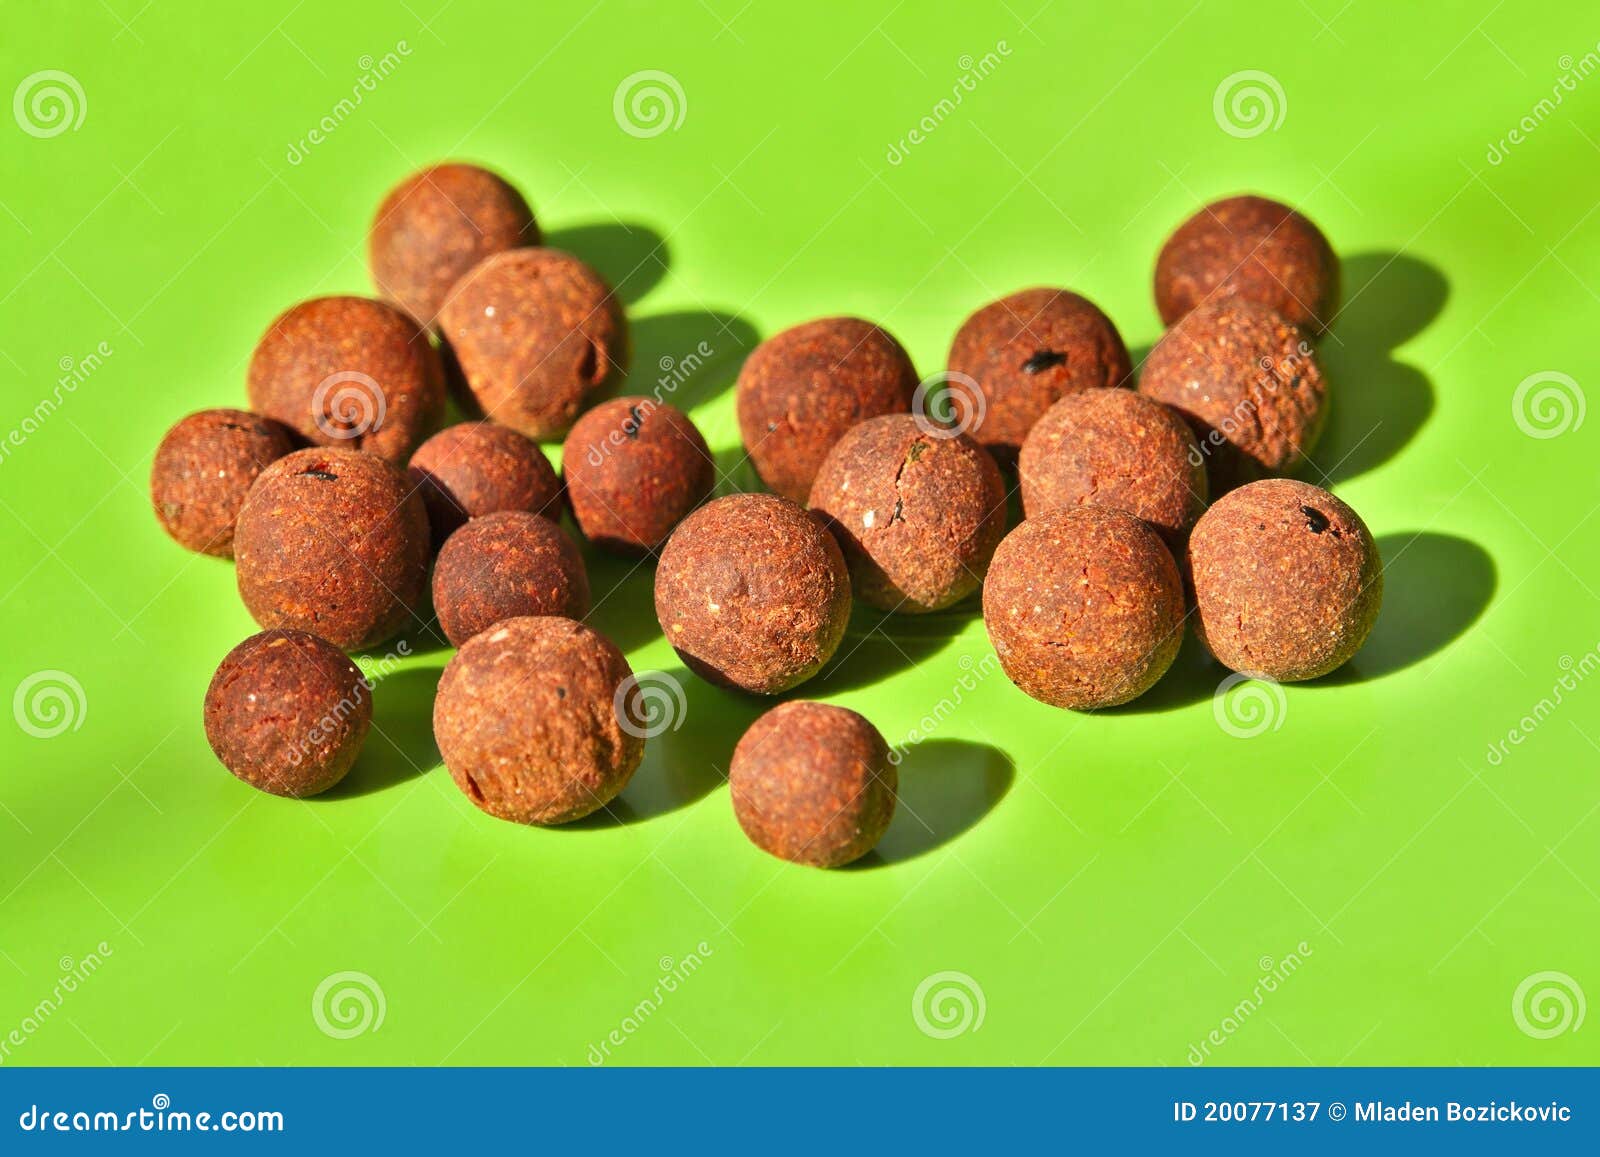 Carp bait boilies stock image. Image of dyes, flavoring - 20077137